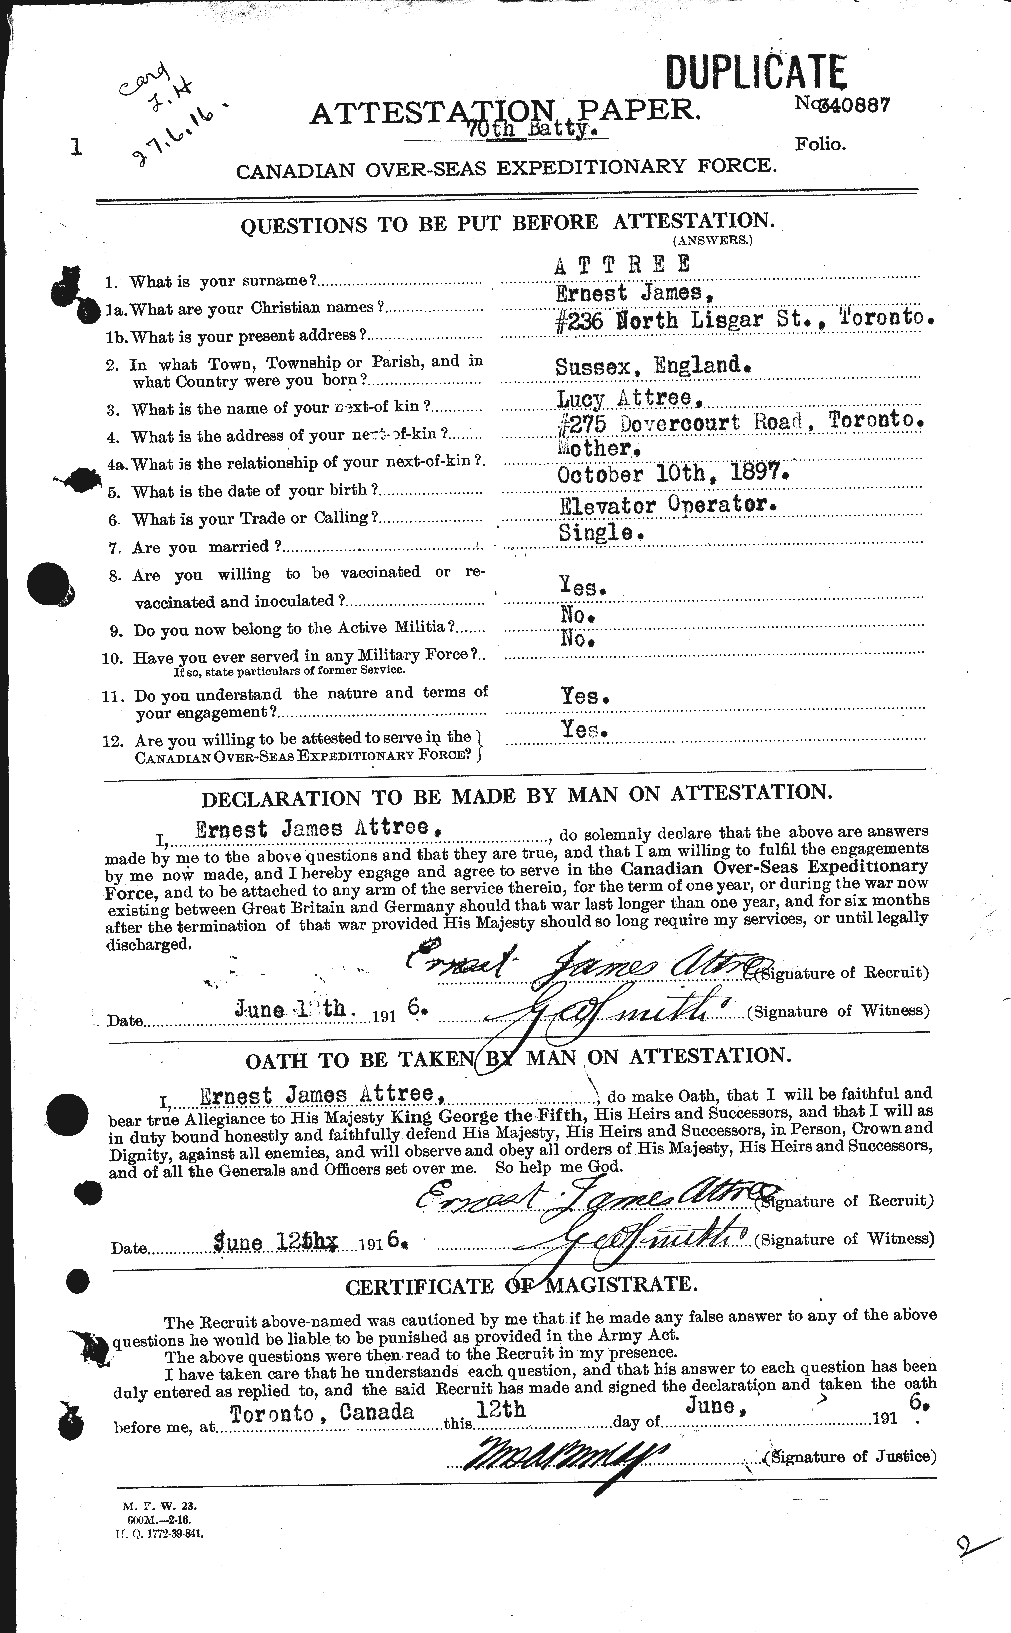 Personnel Records of the First World War - CEF 224074a